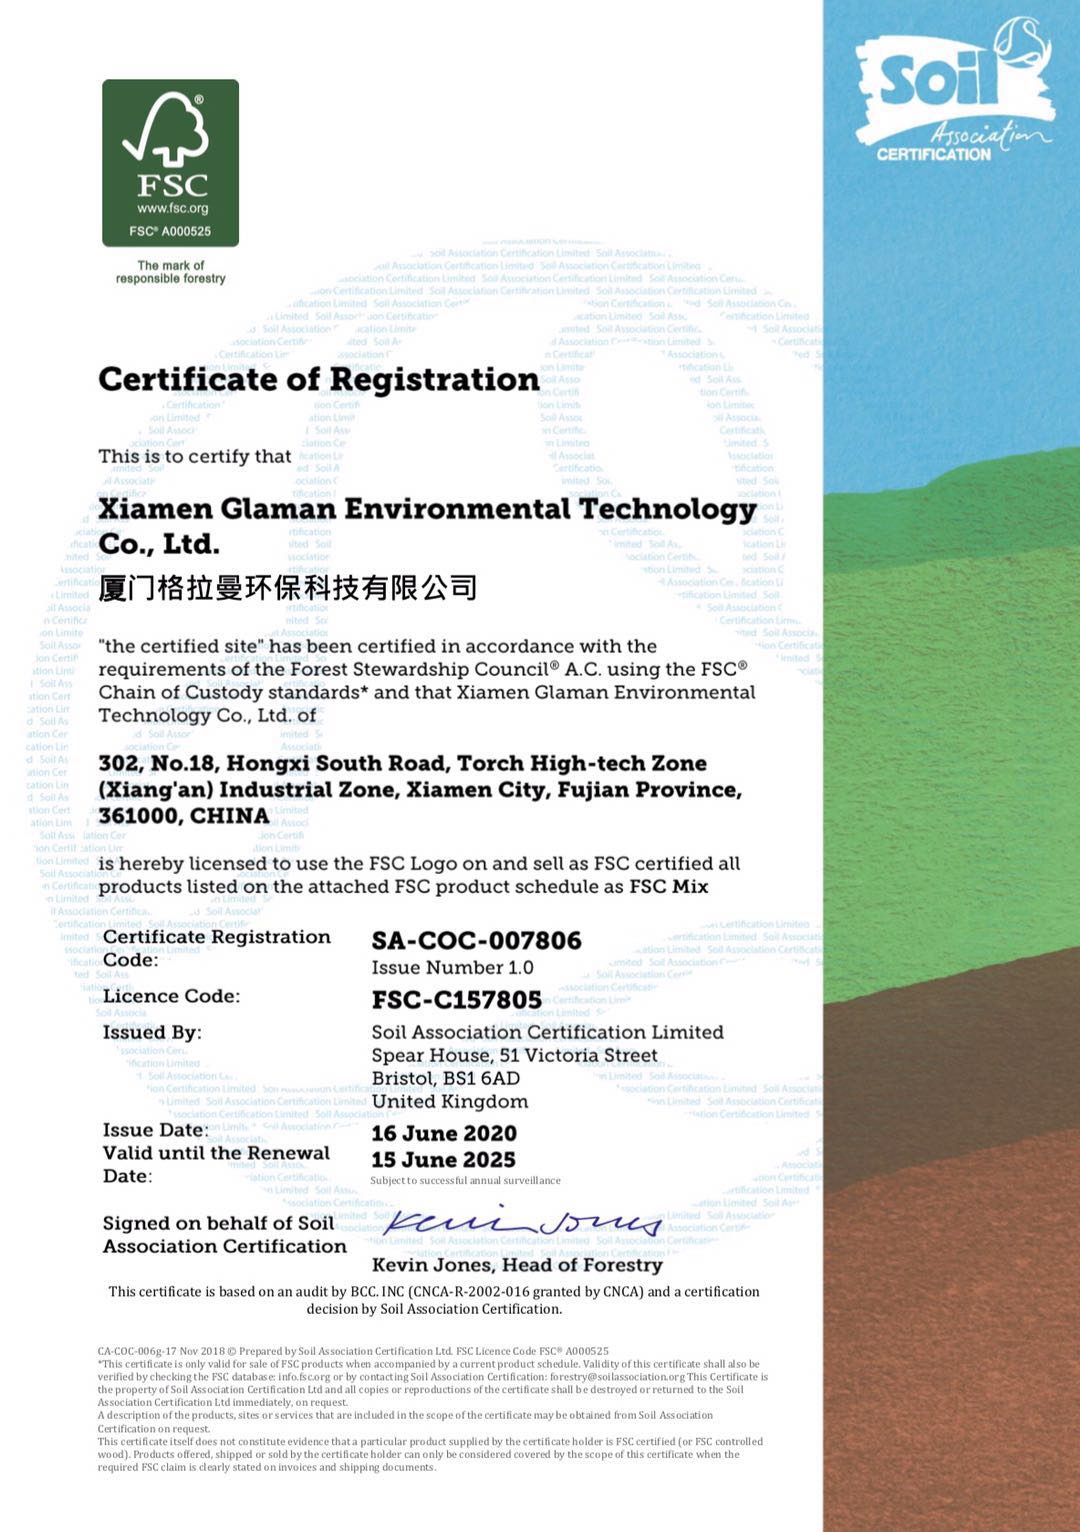 The certification of FSC